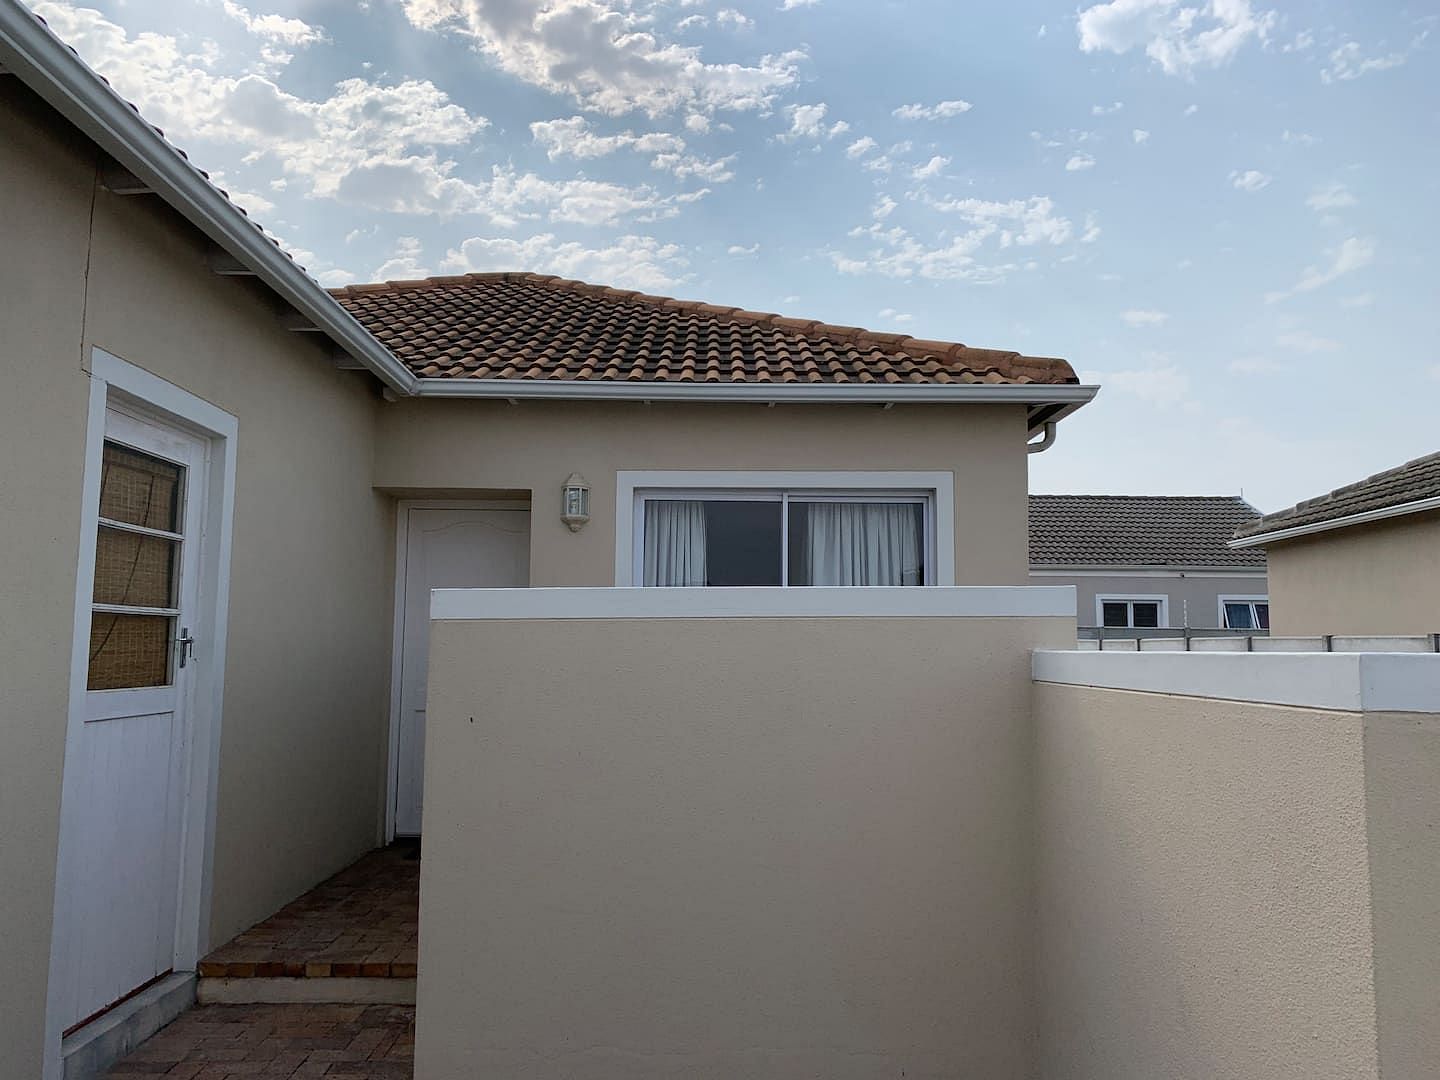 JWguest Residential Home at Cape Town, Western Cape | Wonderful Maison | Jwbnb no brobnb 19